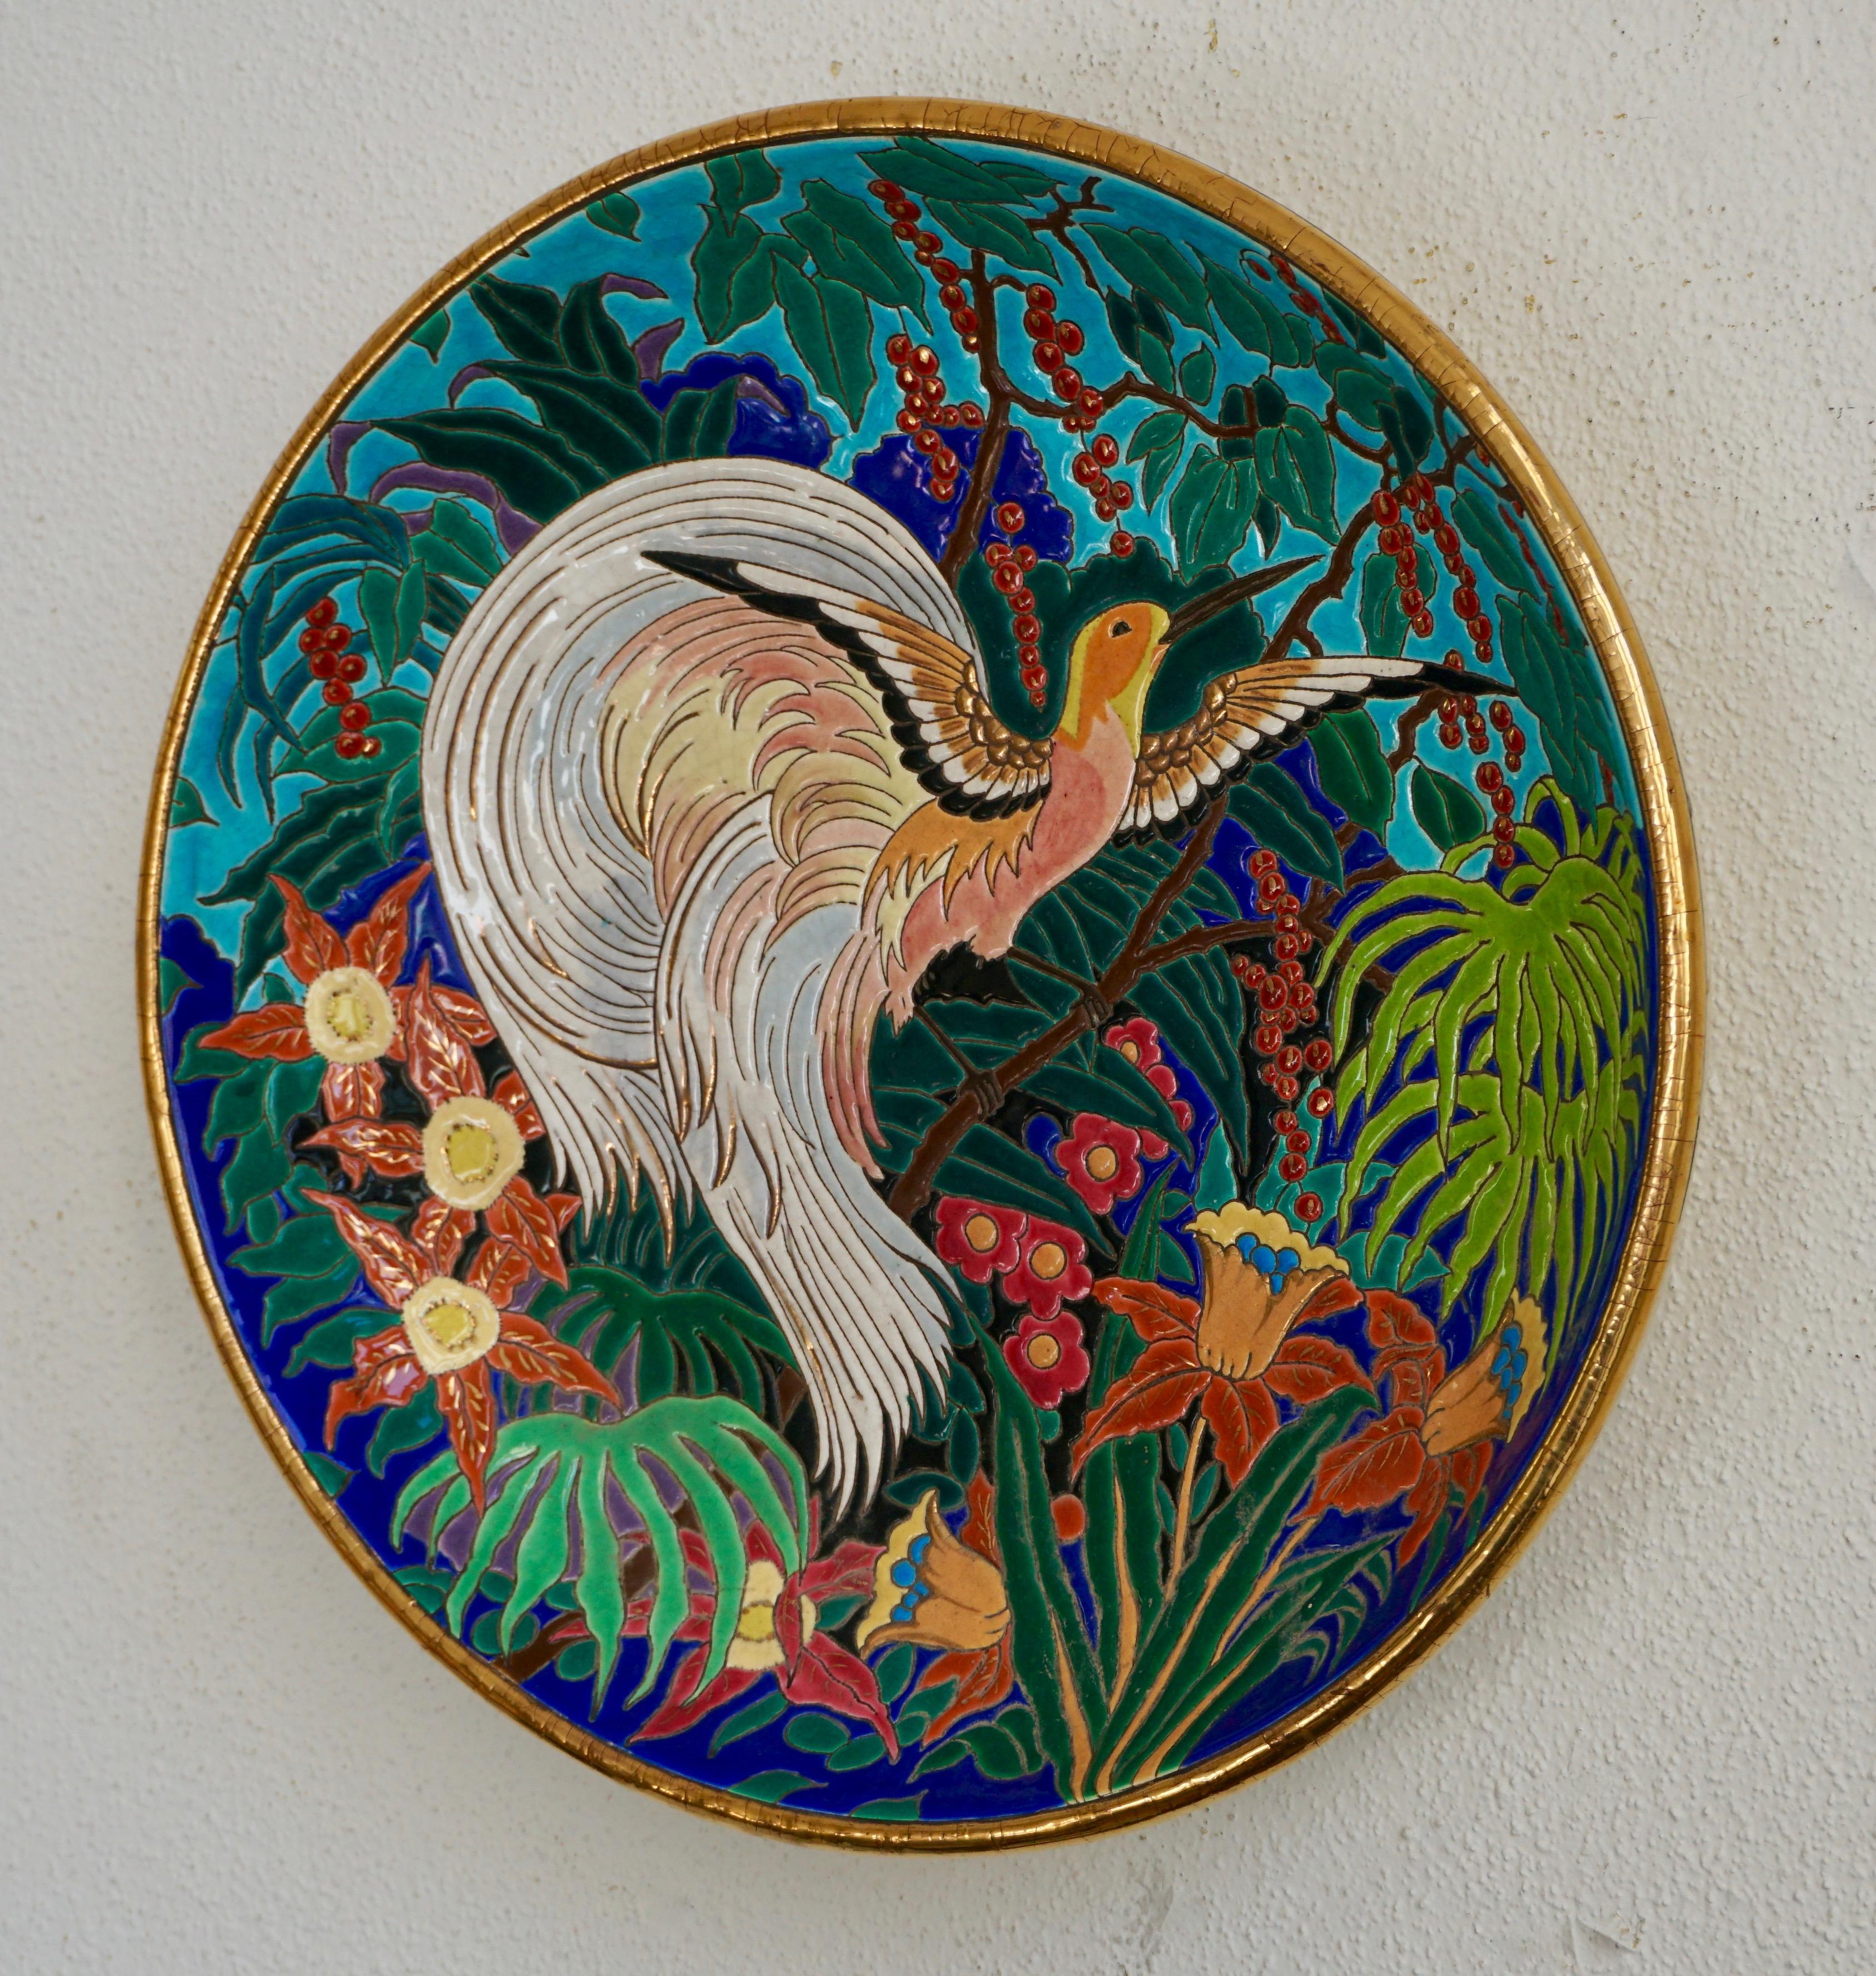 Wonderful large decorative French deep wall charger by Maurice Paul Chevallier for Fai¨ences de Longwy de Luneville. Decorated in a crackle glaze of vibrant colors and gilt and enameled with a bird surrounded by colorful foliage. Craquelle white